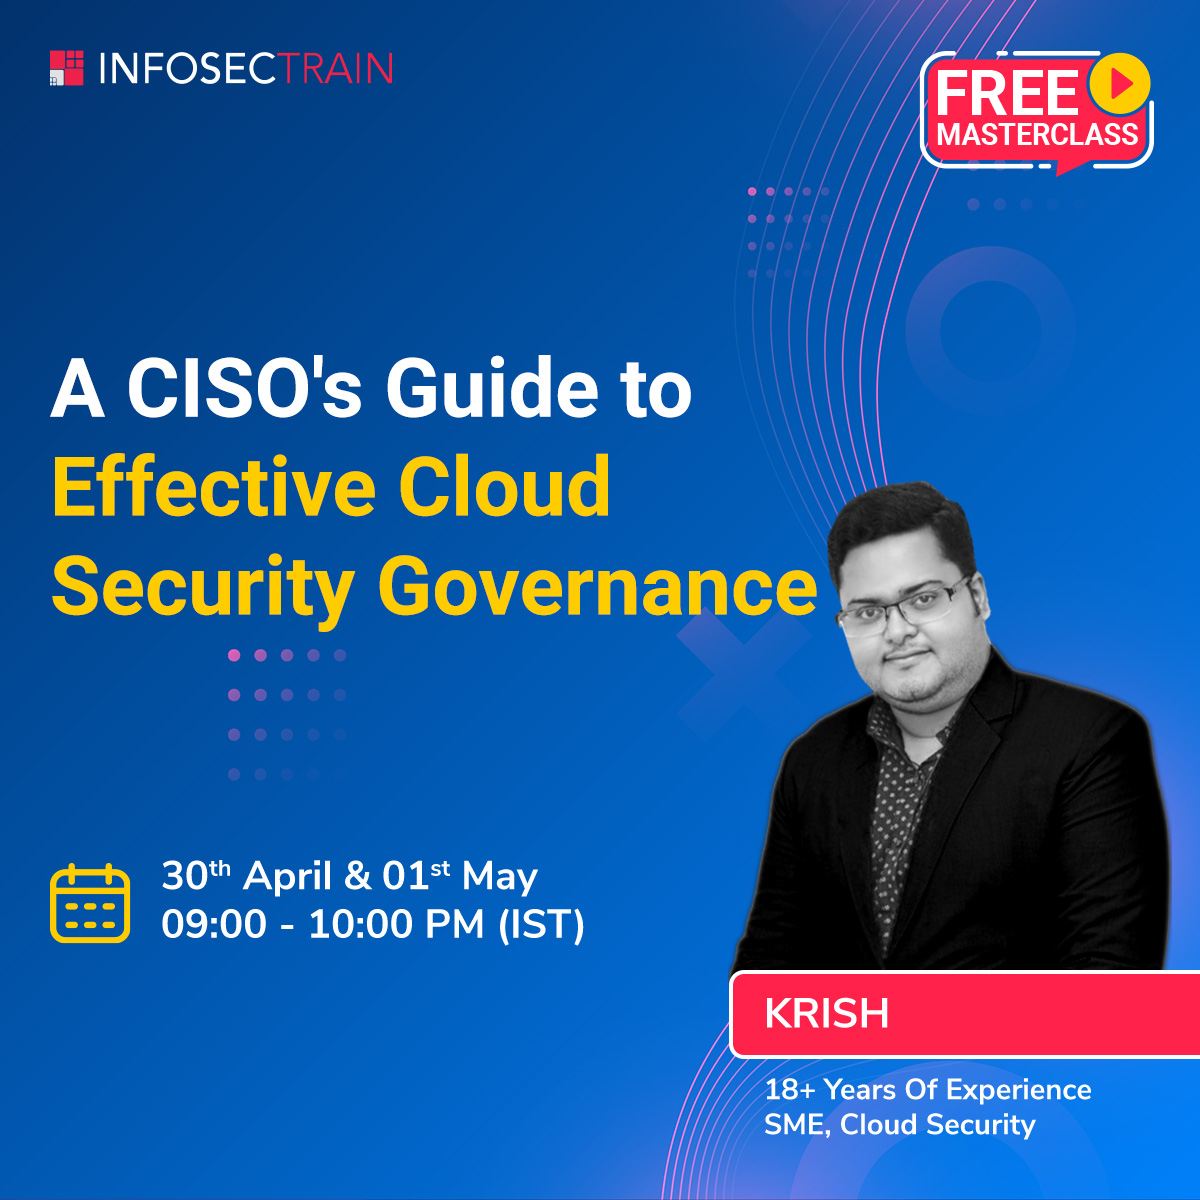 A CISO’s Guide to Effective Cloud Security Governance, Online Event